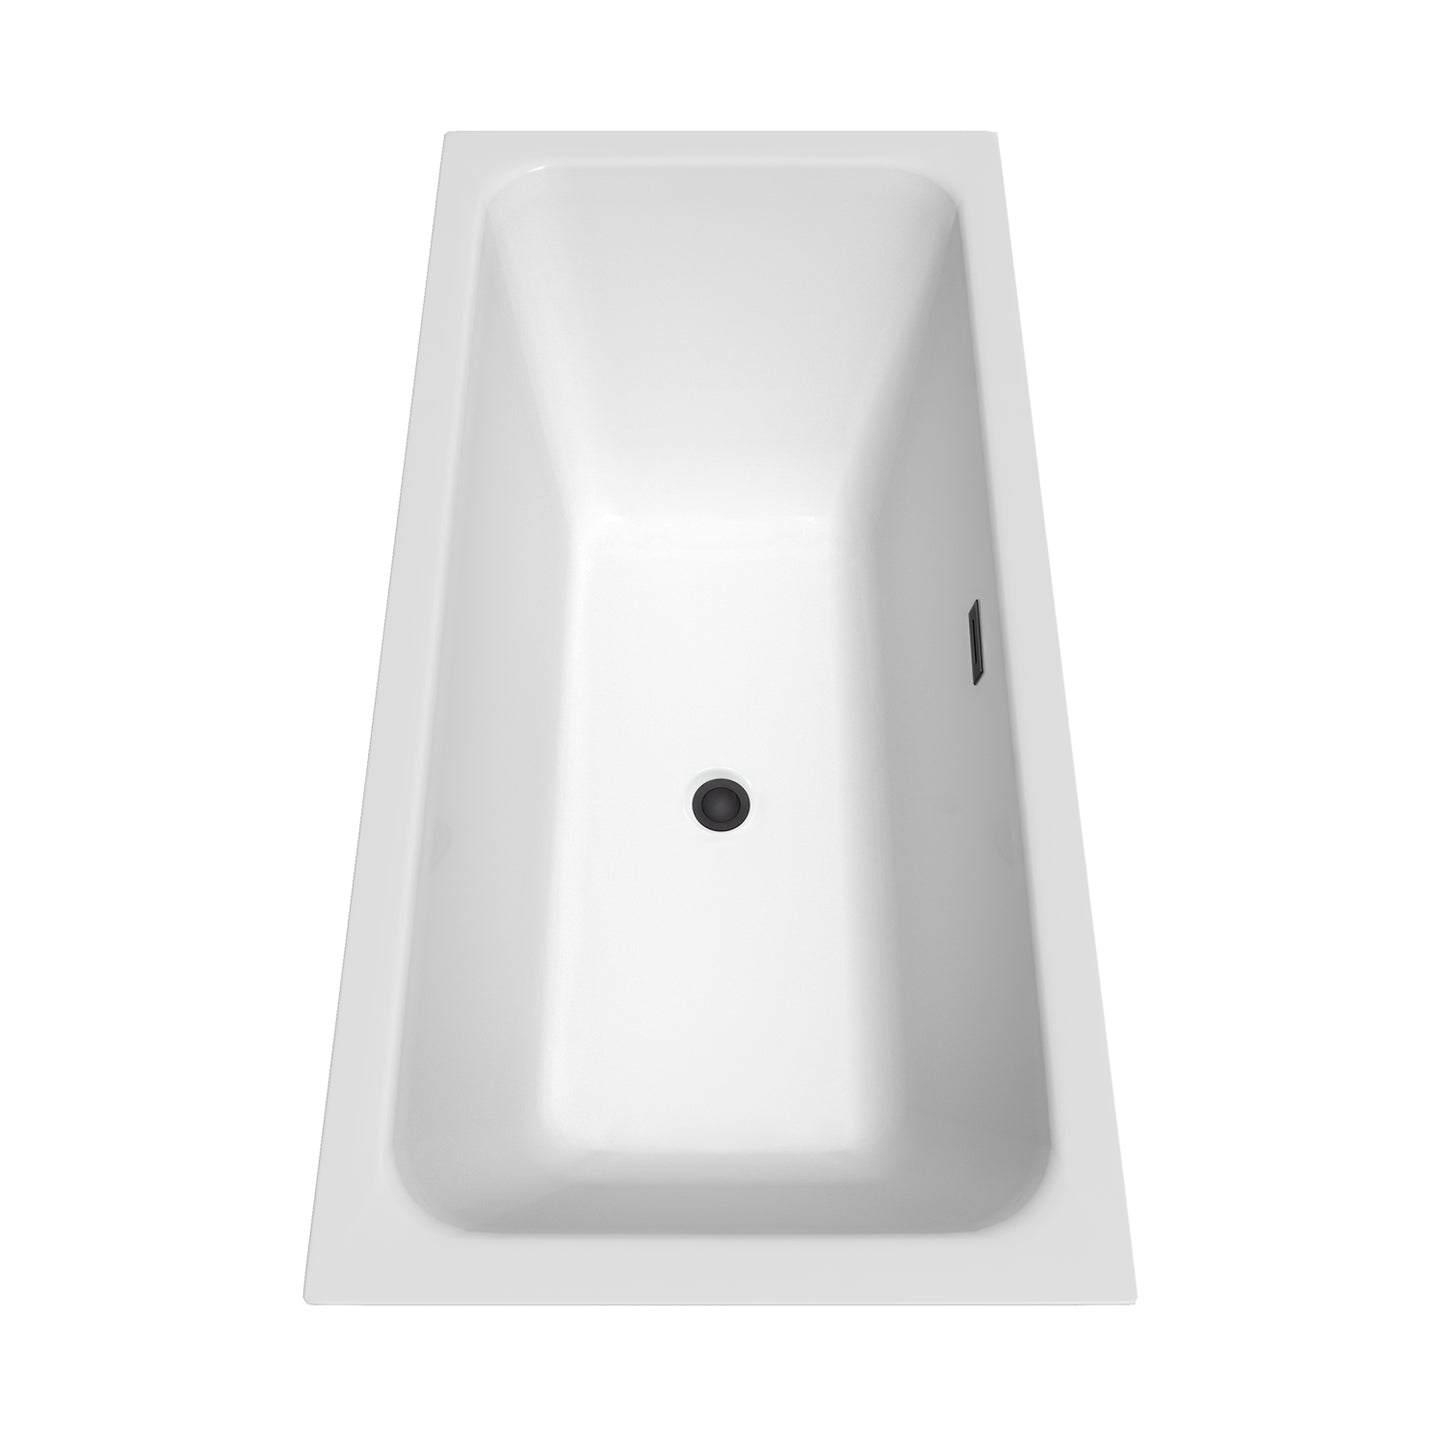 Wyndham Collection Galina 67 Inch Freestanding Bathtub in White with Floor Mounted Faucet, Drain and Overflow Trim in Matte Black - Luxe Bathroom Vanities